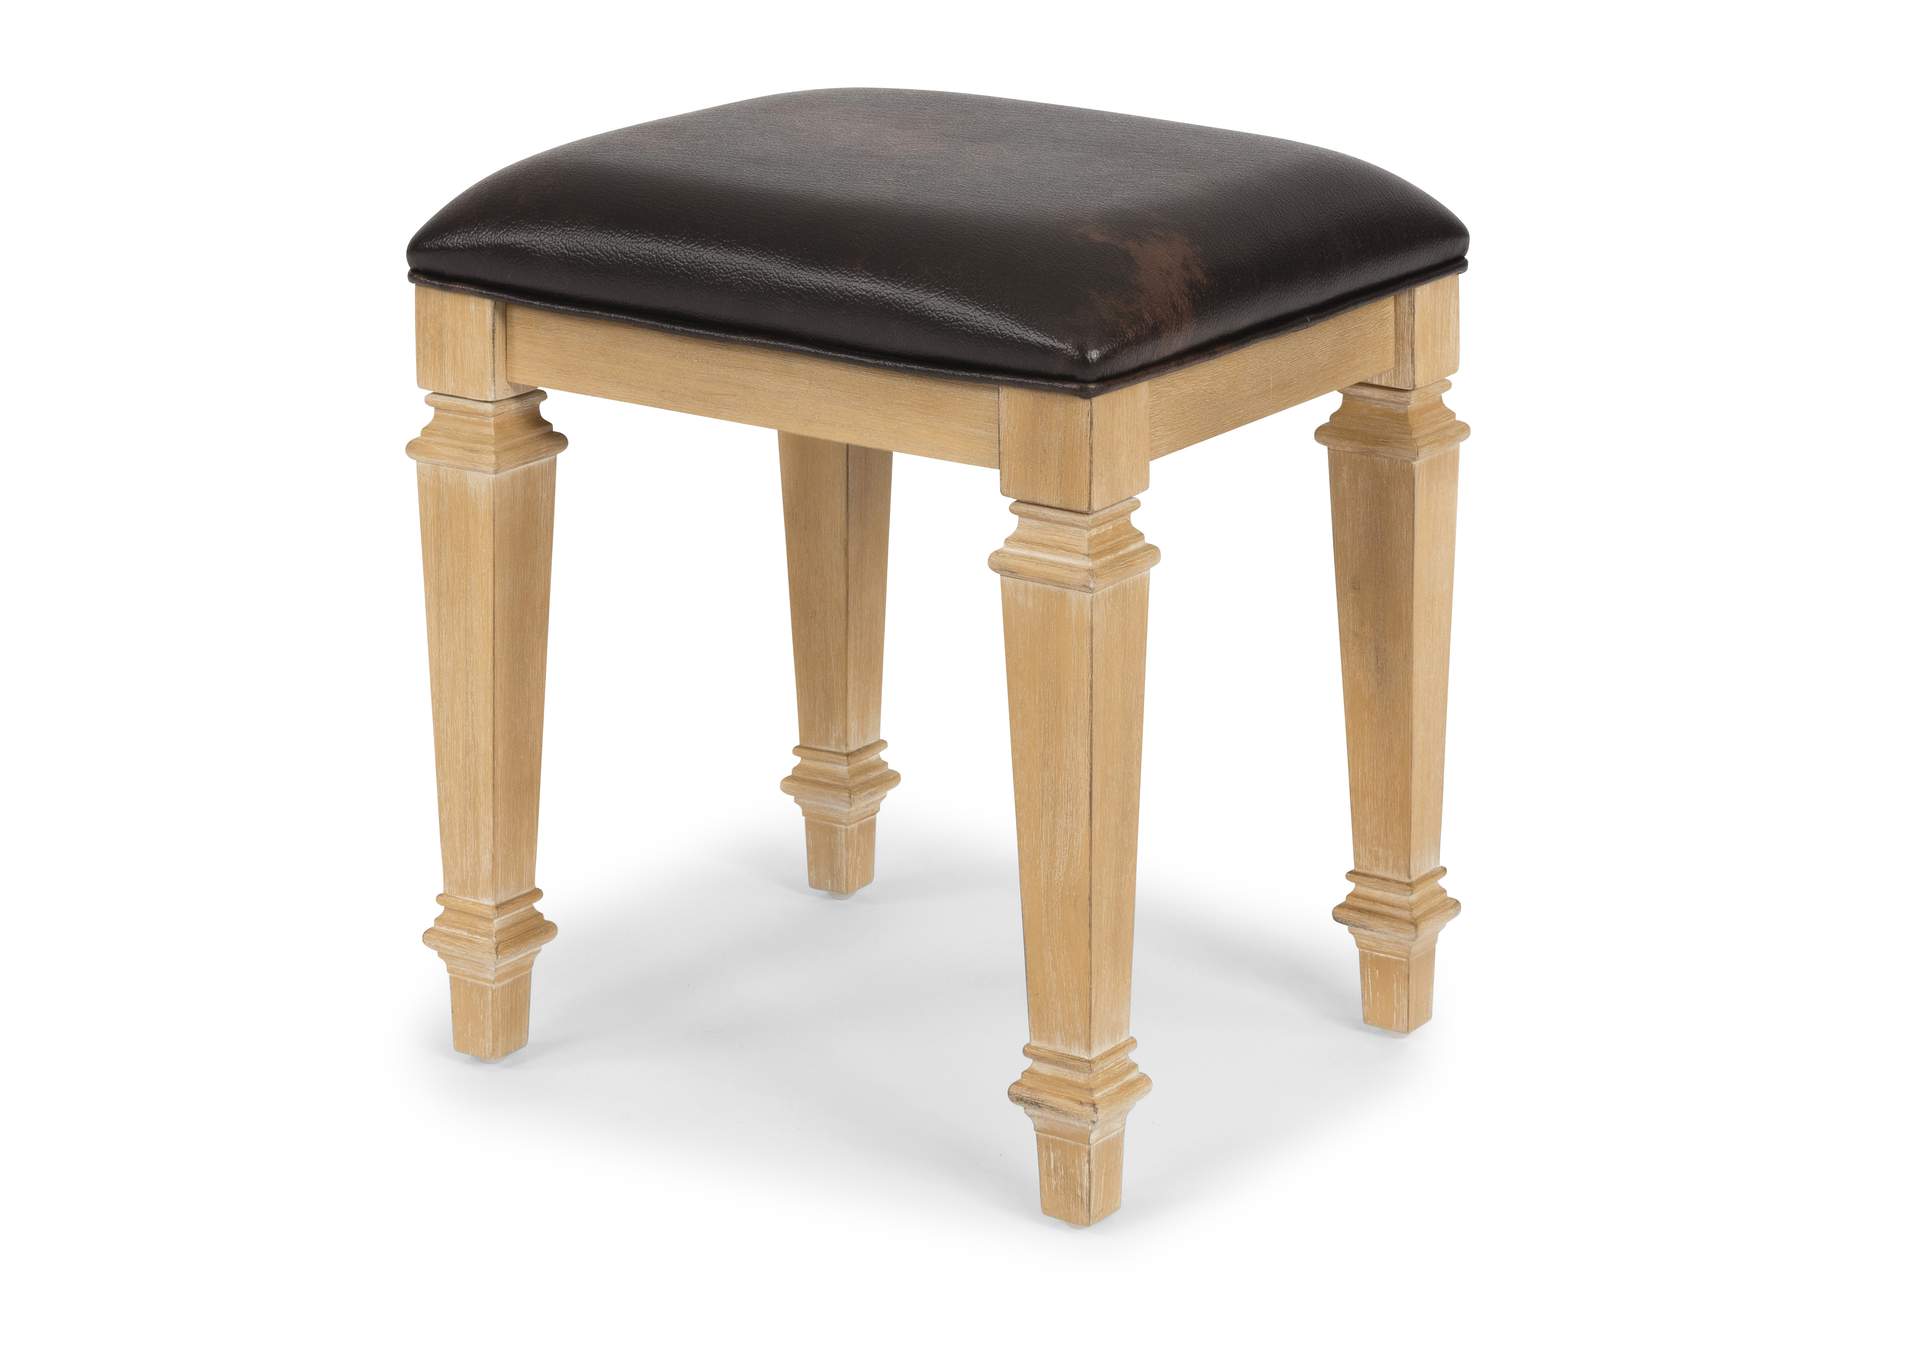 Manor House Vanity Bench By Homestyles,Homestyles